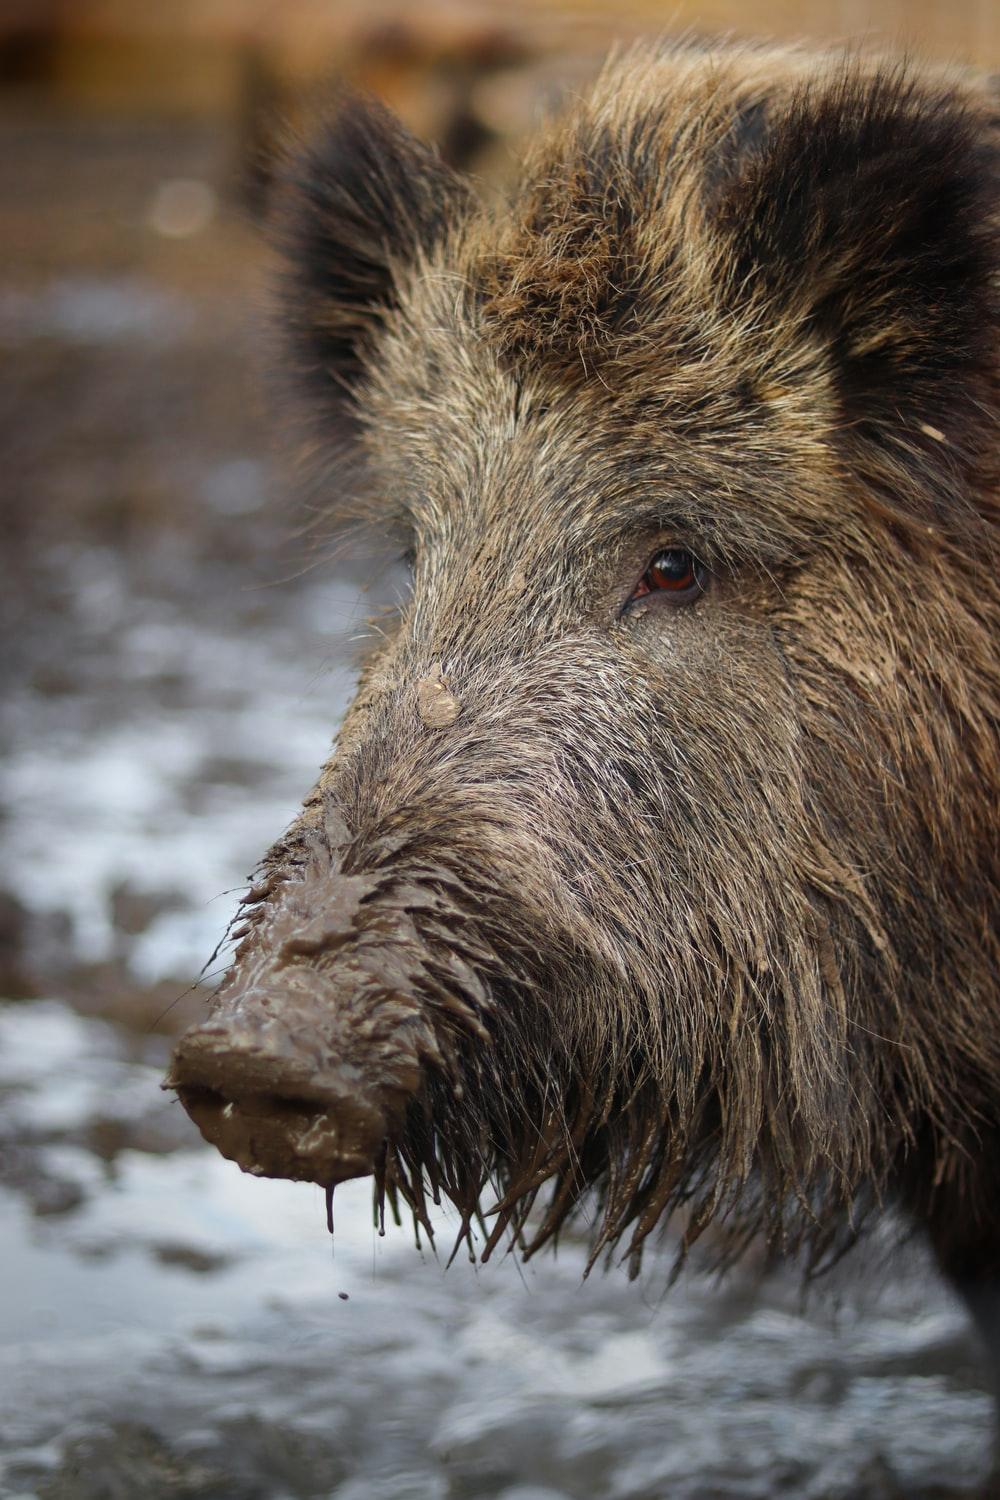 Hog Picture. Download Free Image